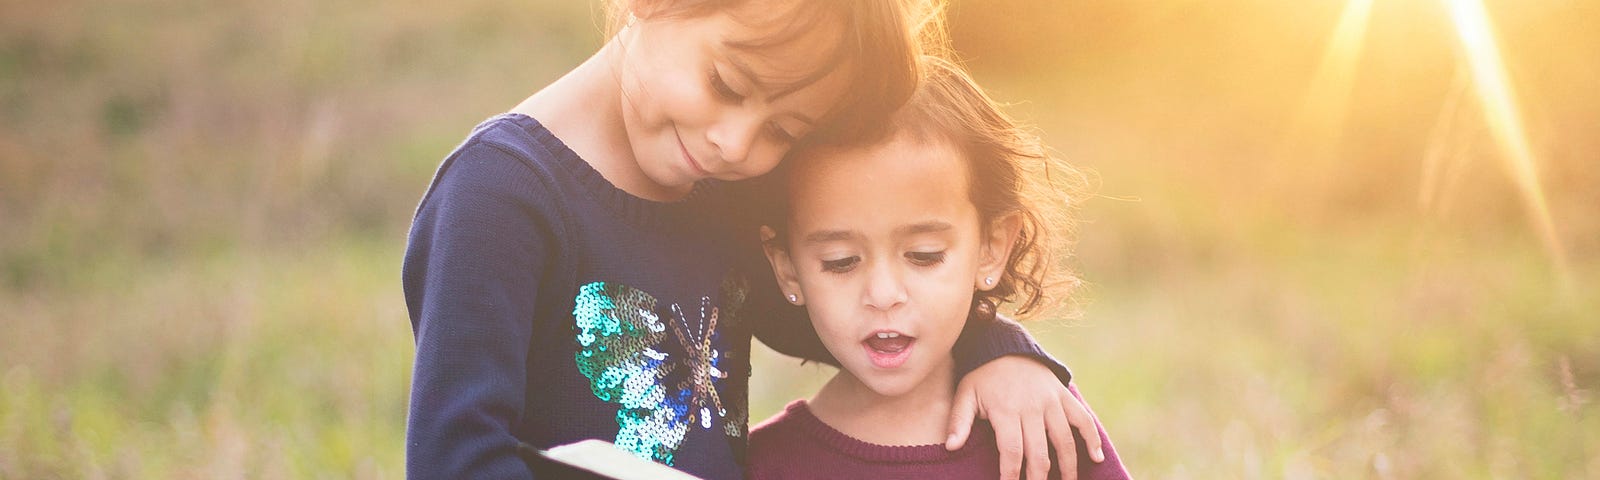 The image depicts two young children outdoors during what appears to be late afternoon, given the warm, golden sunlight in the background. The older child, wearing a navy-blue sweater with sequin embellishments and white leggings tucked into brown boots, is embracing a younger child from behind and holding an open book in front of them both. The younger child, in a maroon dress adorned with a white unicorn and matching maroon tights, is attentively looking at the book.